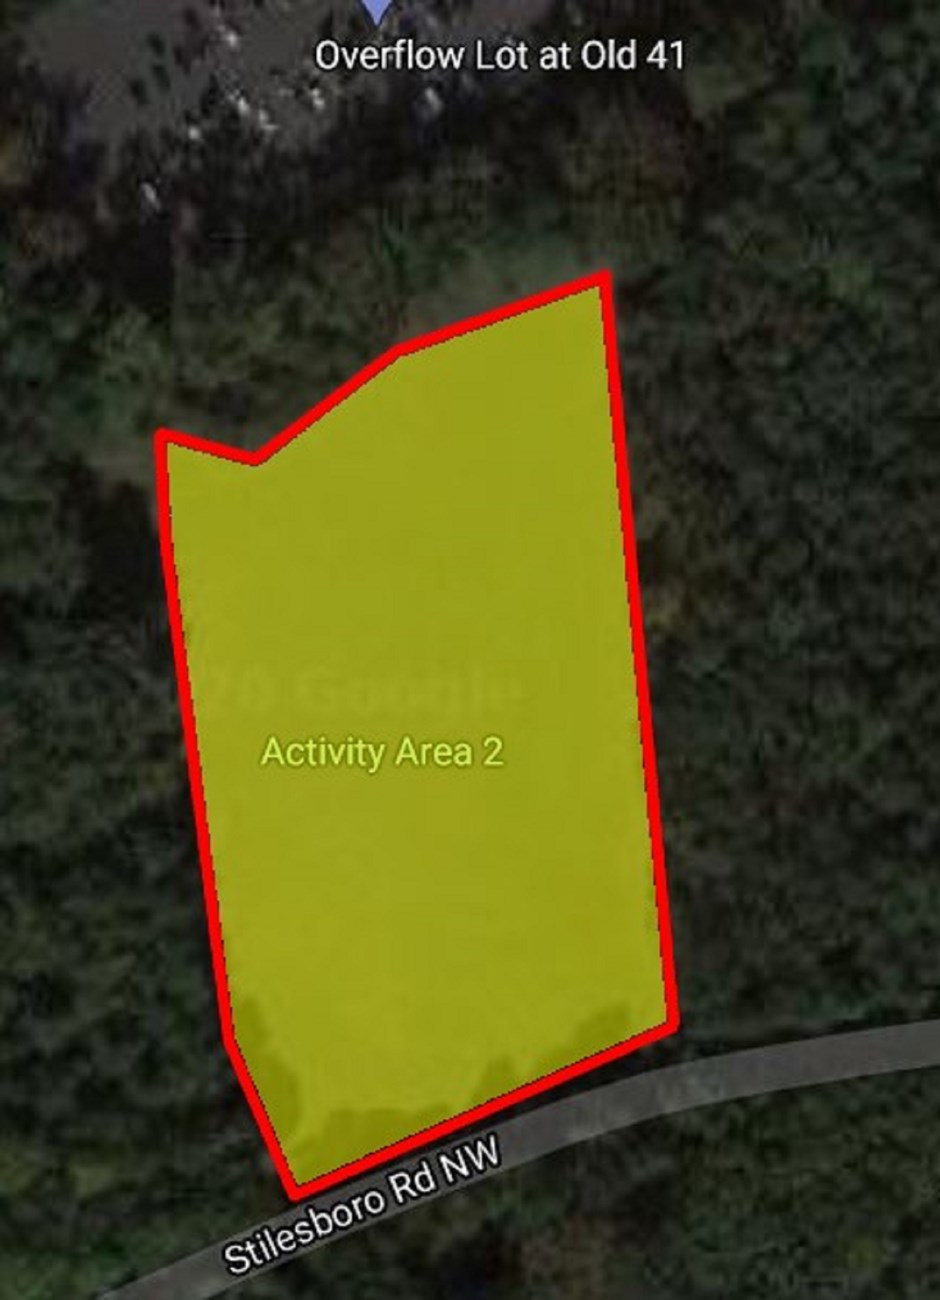 Yellow highlights rectangular area surrounded by trees. Top of picture is labeled Overflow Lot at Old 41. Below and adjacent to rectangular is parallel street labeled Stilesboro Rd NW.